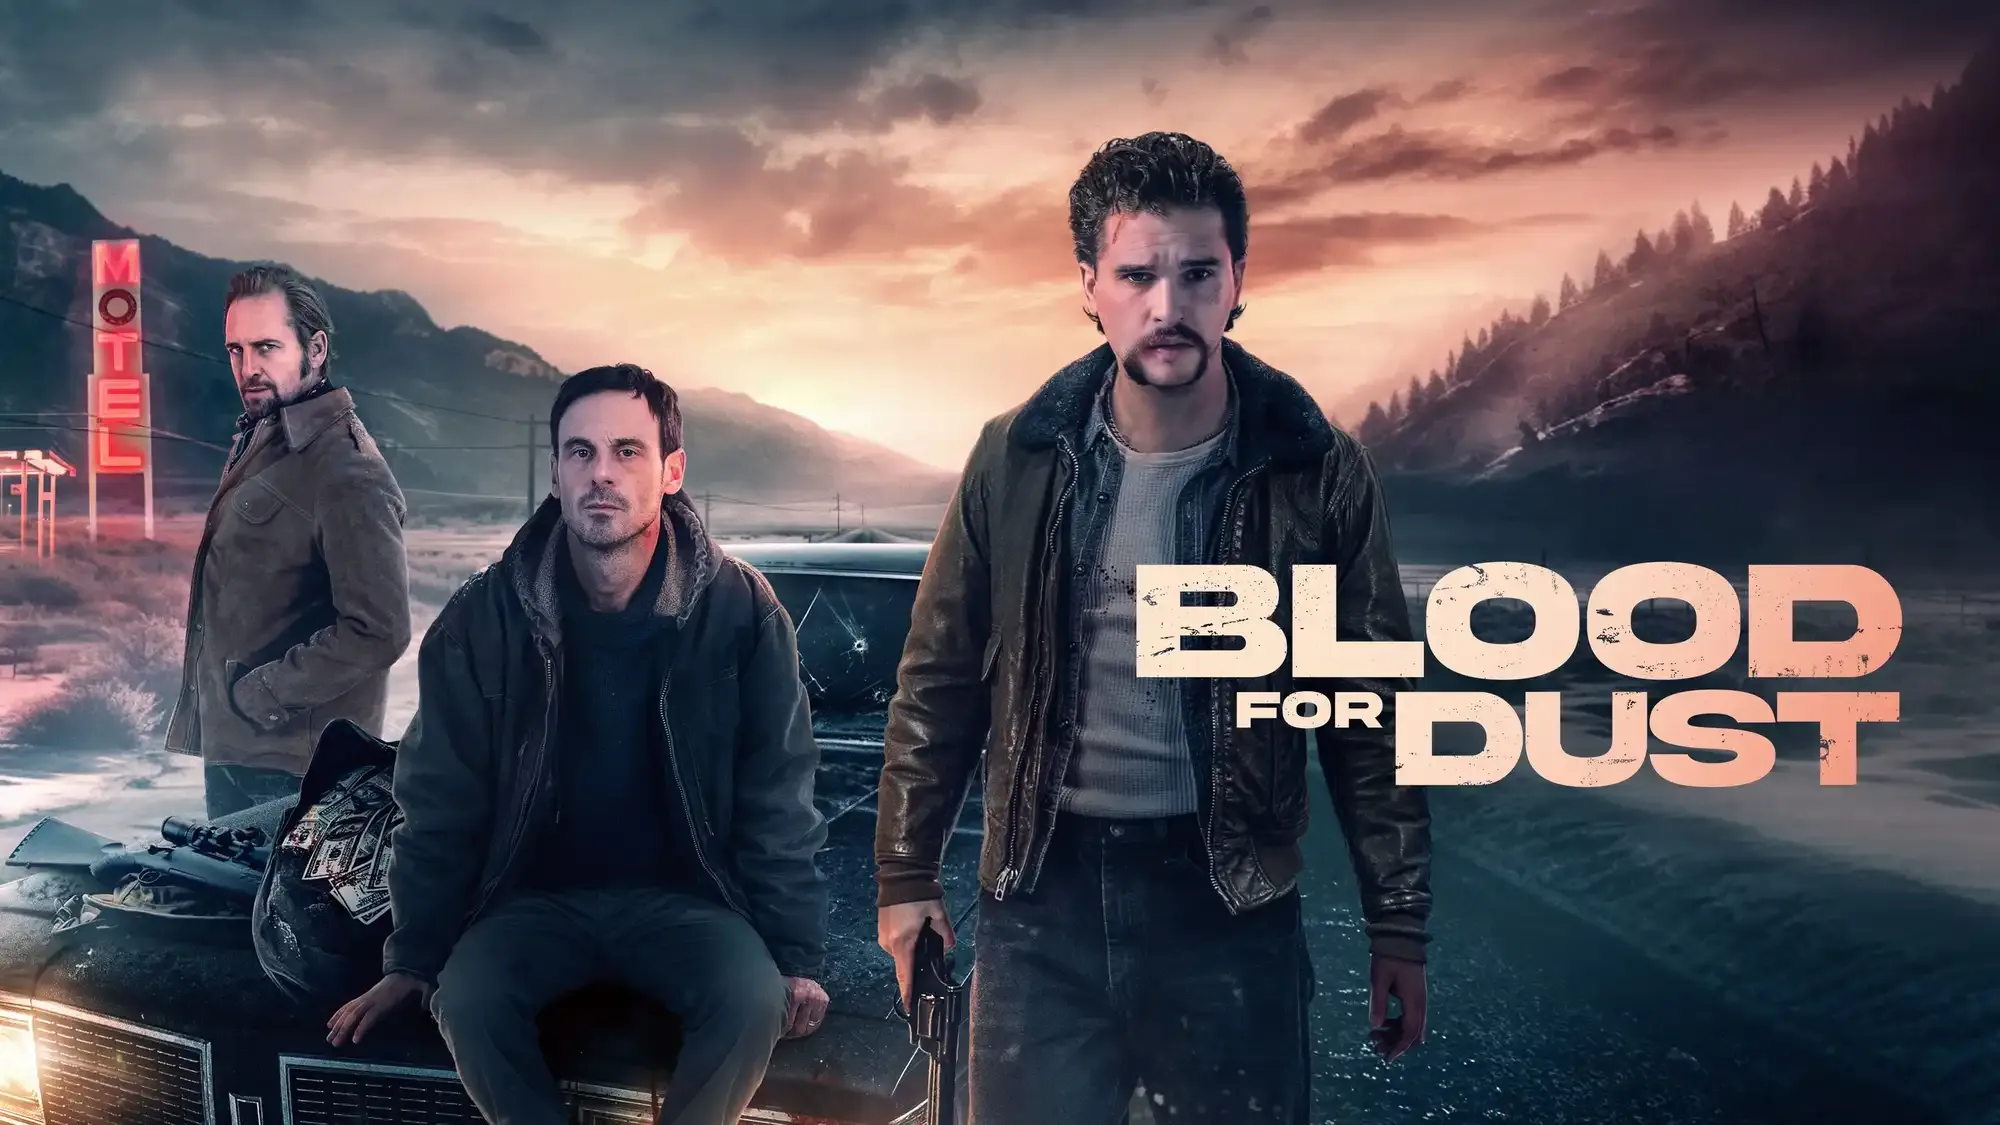 Blood for Dust movie review